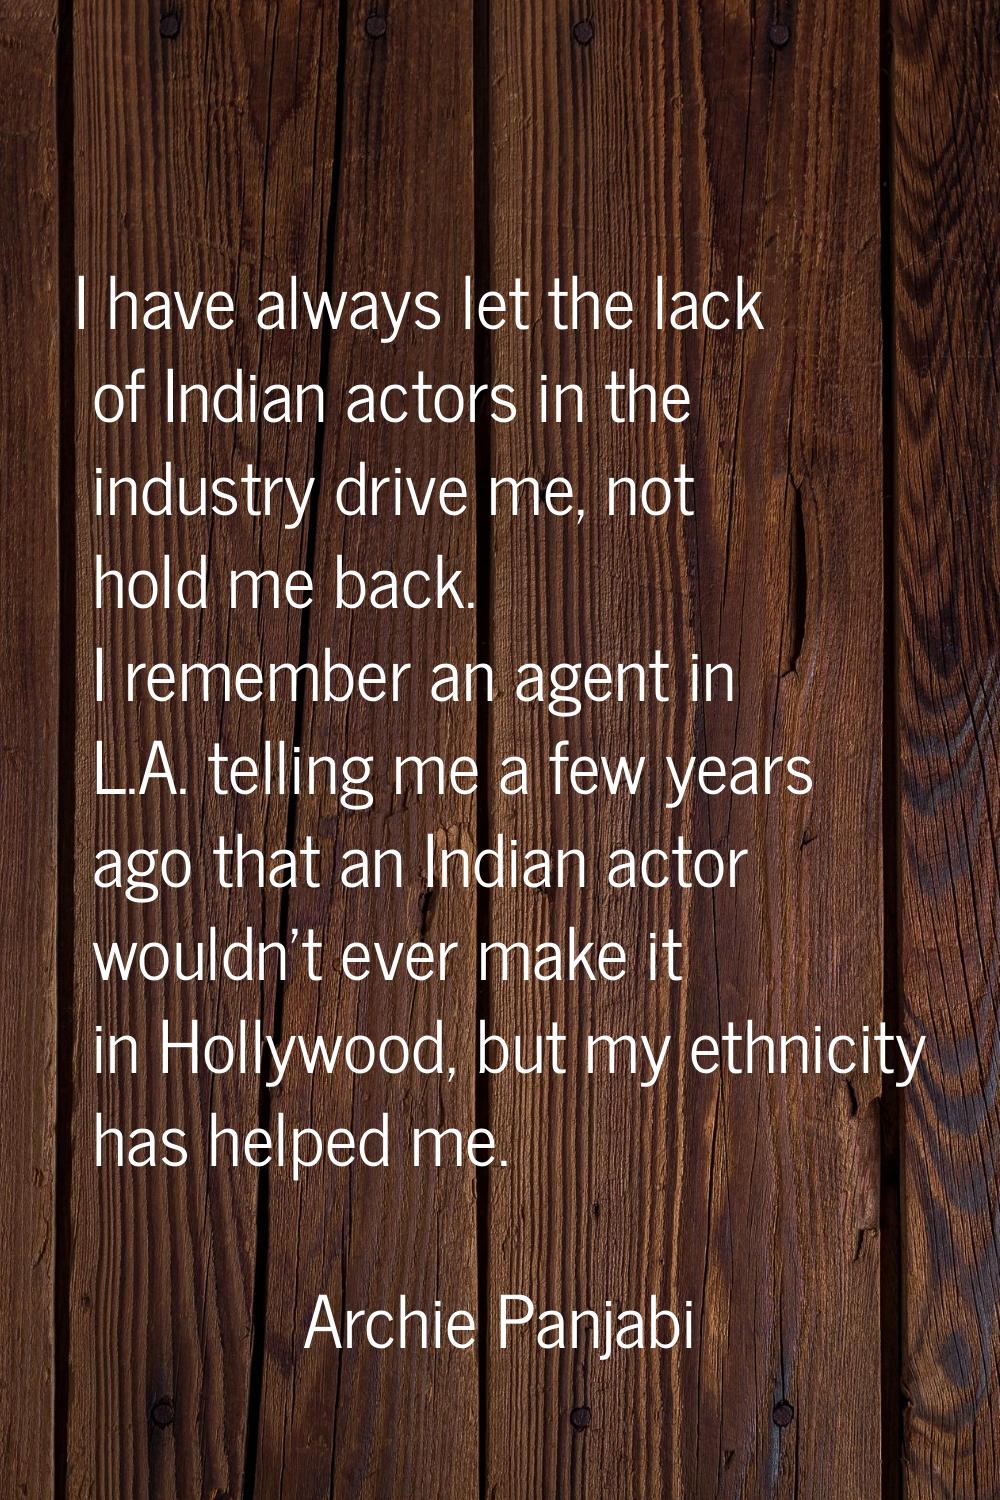 I have always let the lack of Indian actors in the industry drive me, not hold me back. I remember 